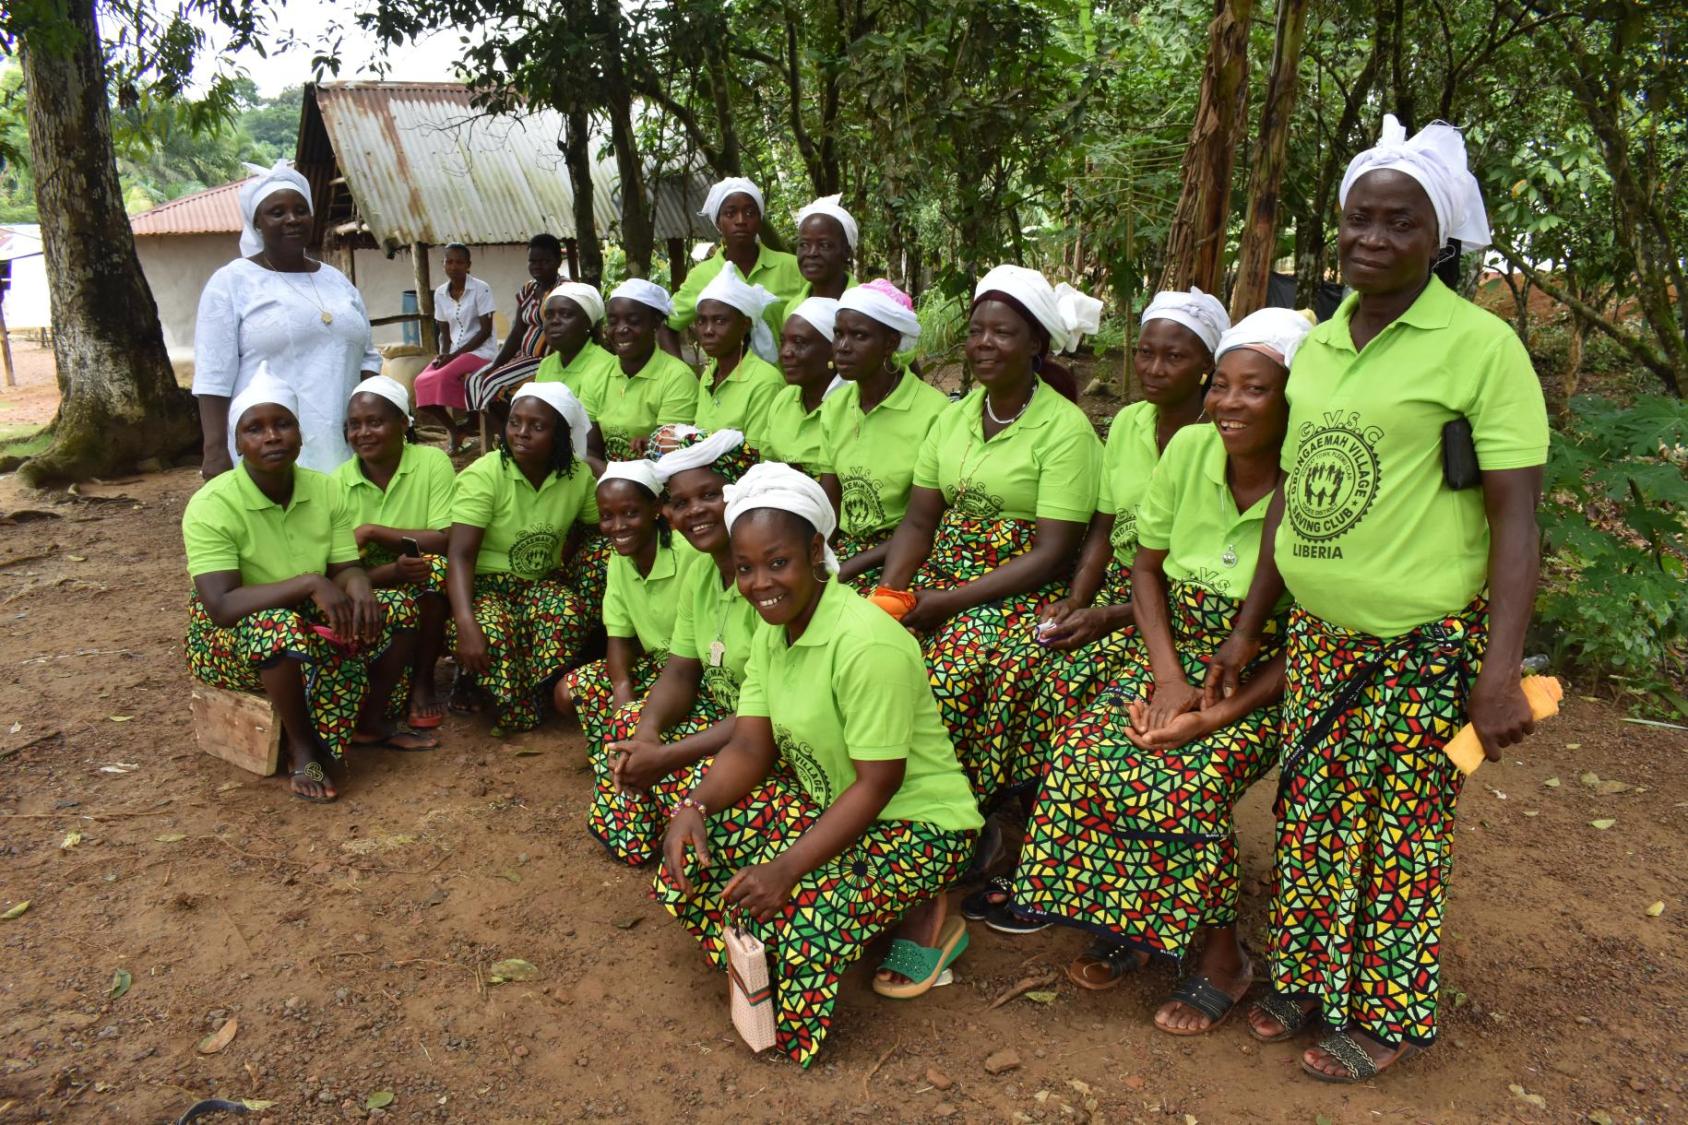 A group of women in green shirts and skirts and white headscarves smile at the camera